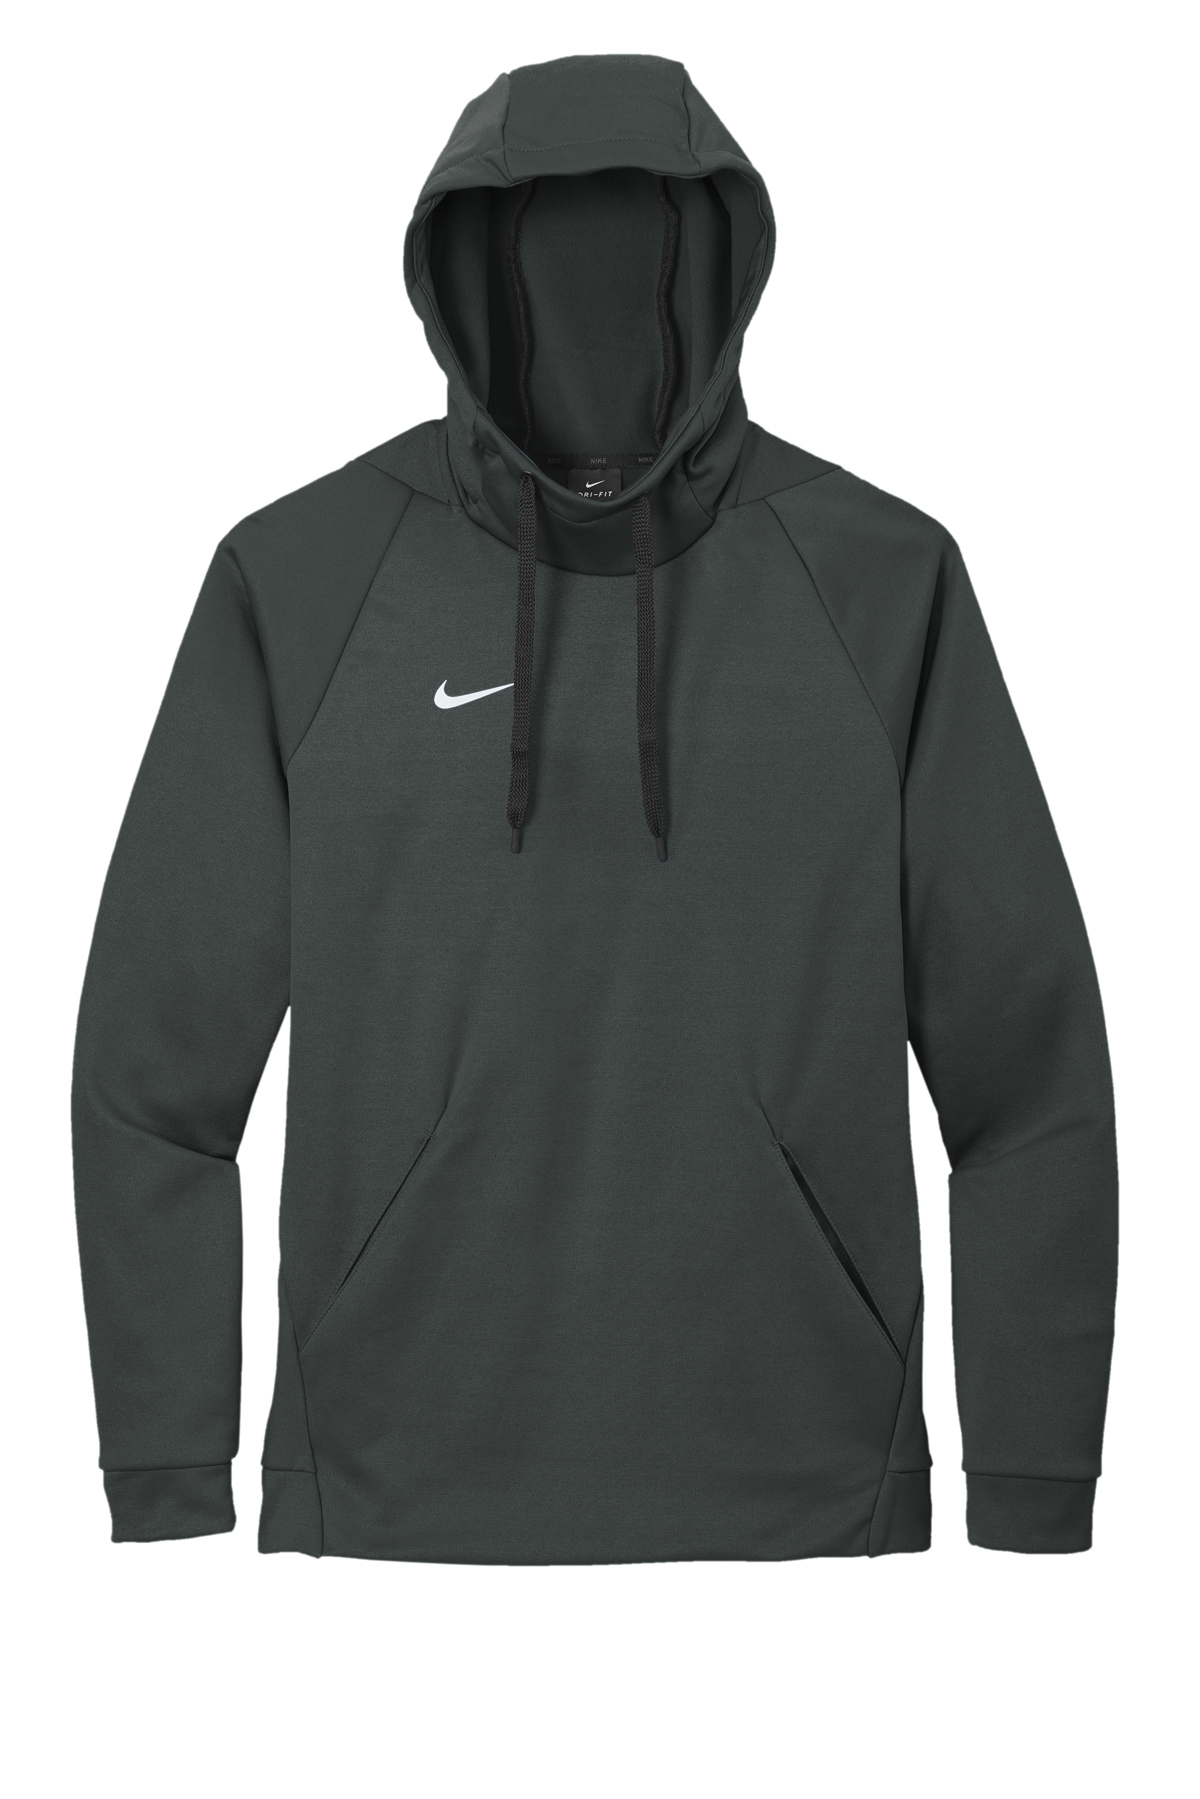 Nike Therma-FIT Pullover Fleece Hoodie | Product | Company Casuals